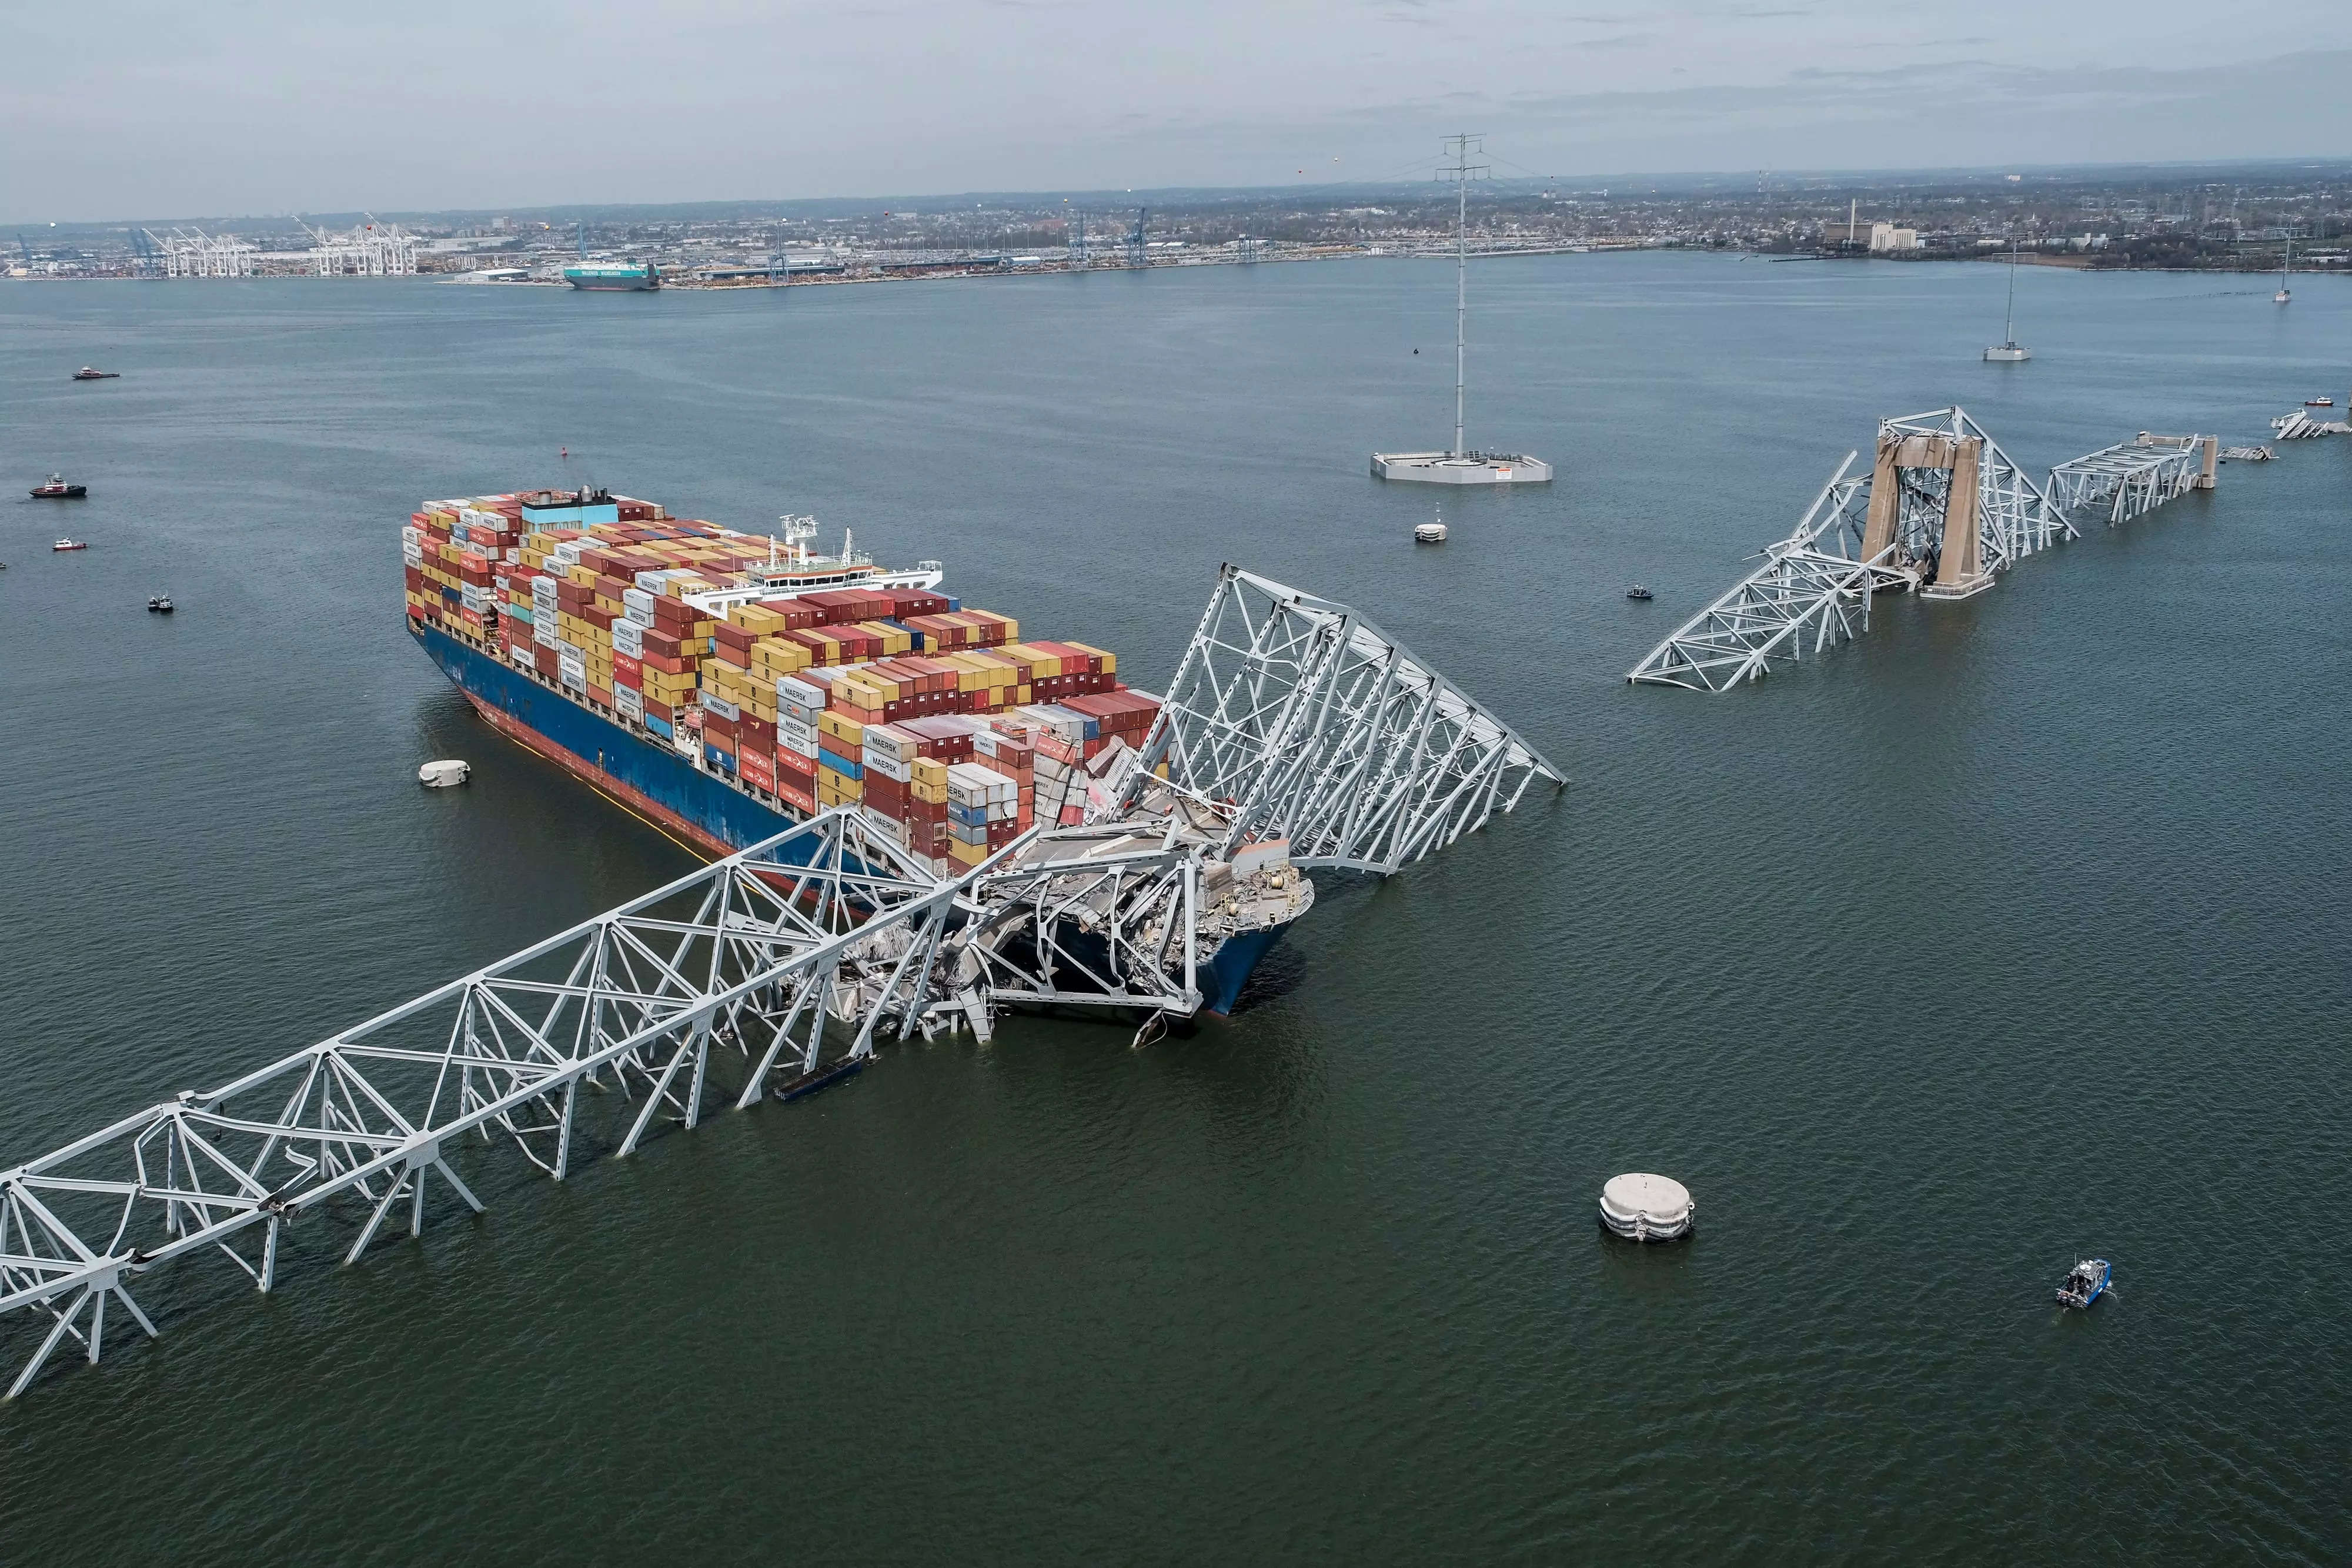 The Baltimore bridge catastrophe could result in the ‘largest single marine insurance coverage loss ever,’ Lloyd’s of London bosses say